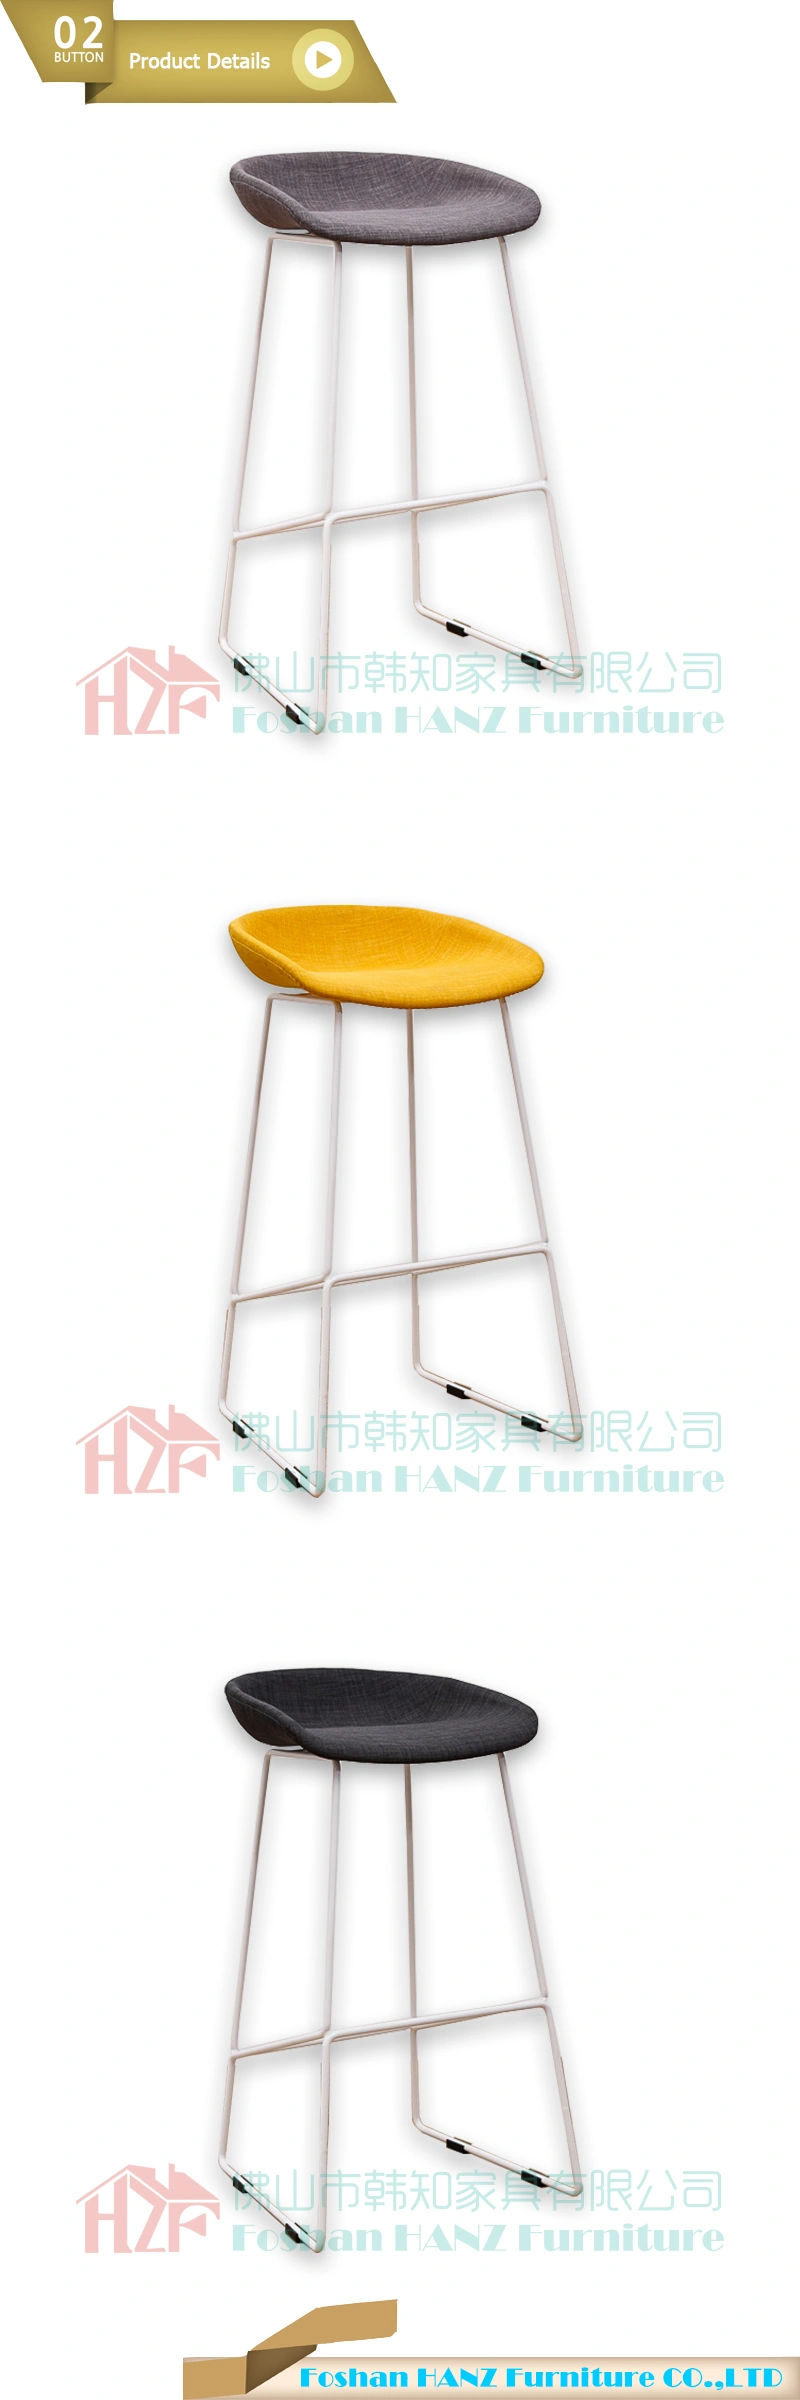 Fabric Bar Chair with White Matel Feet Plastic Cover with Fabric Bar Chair